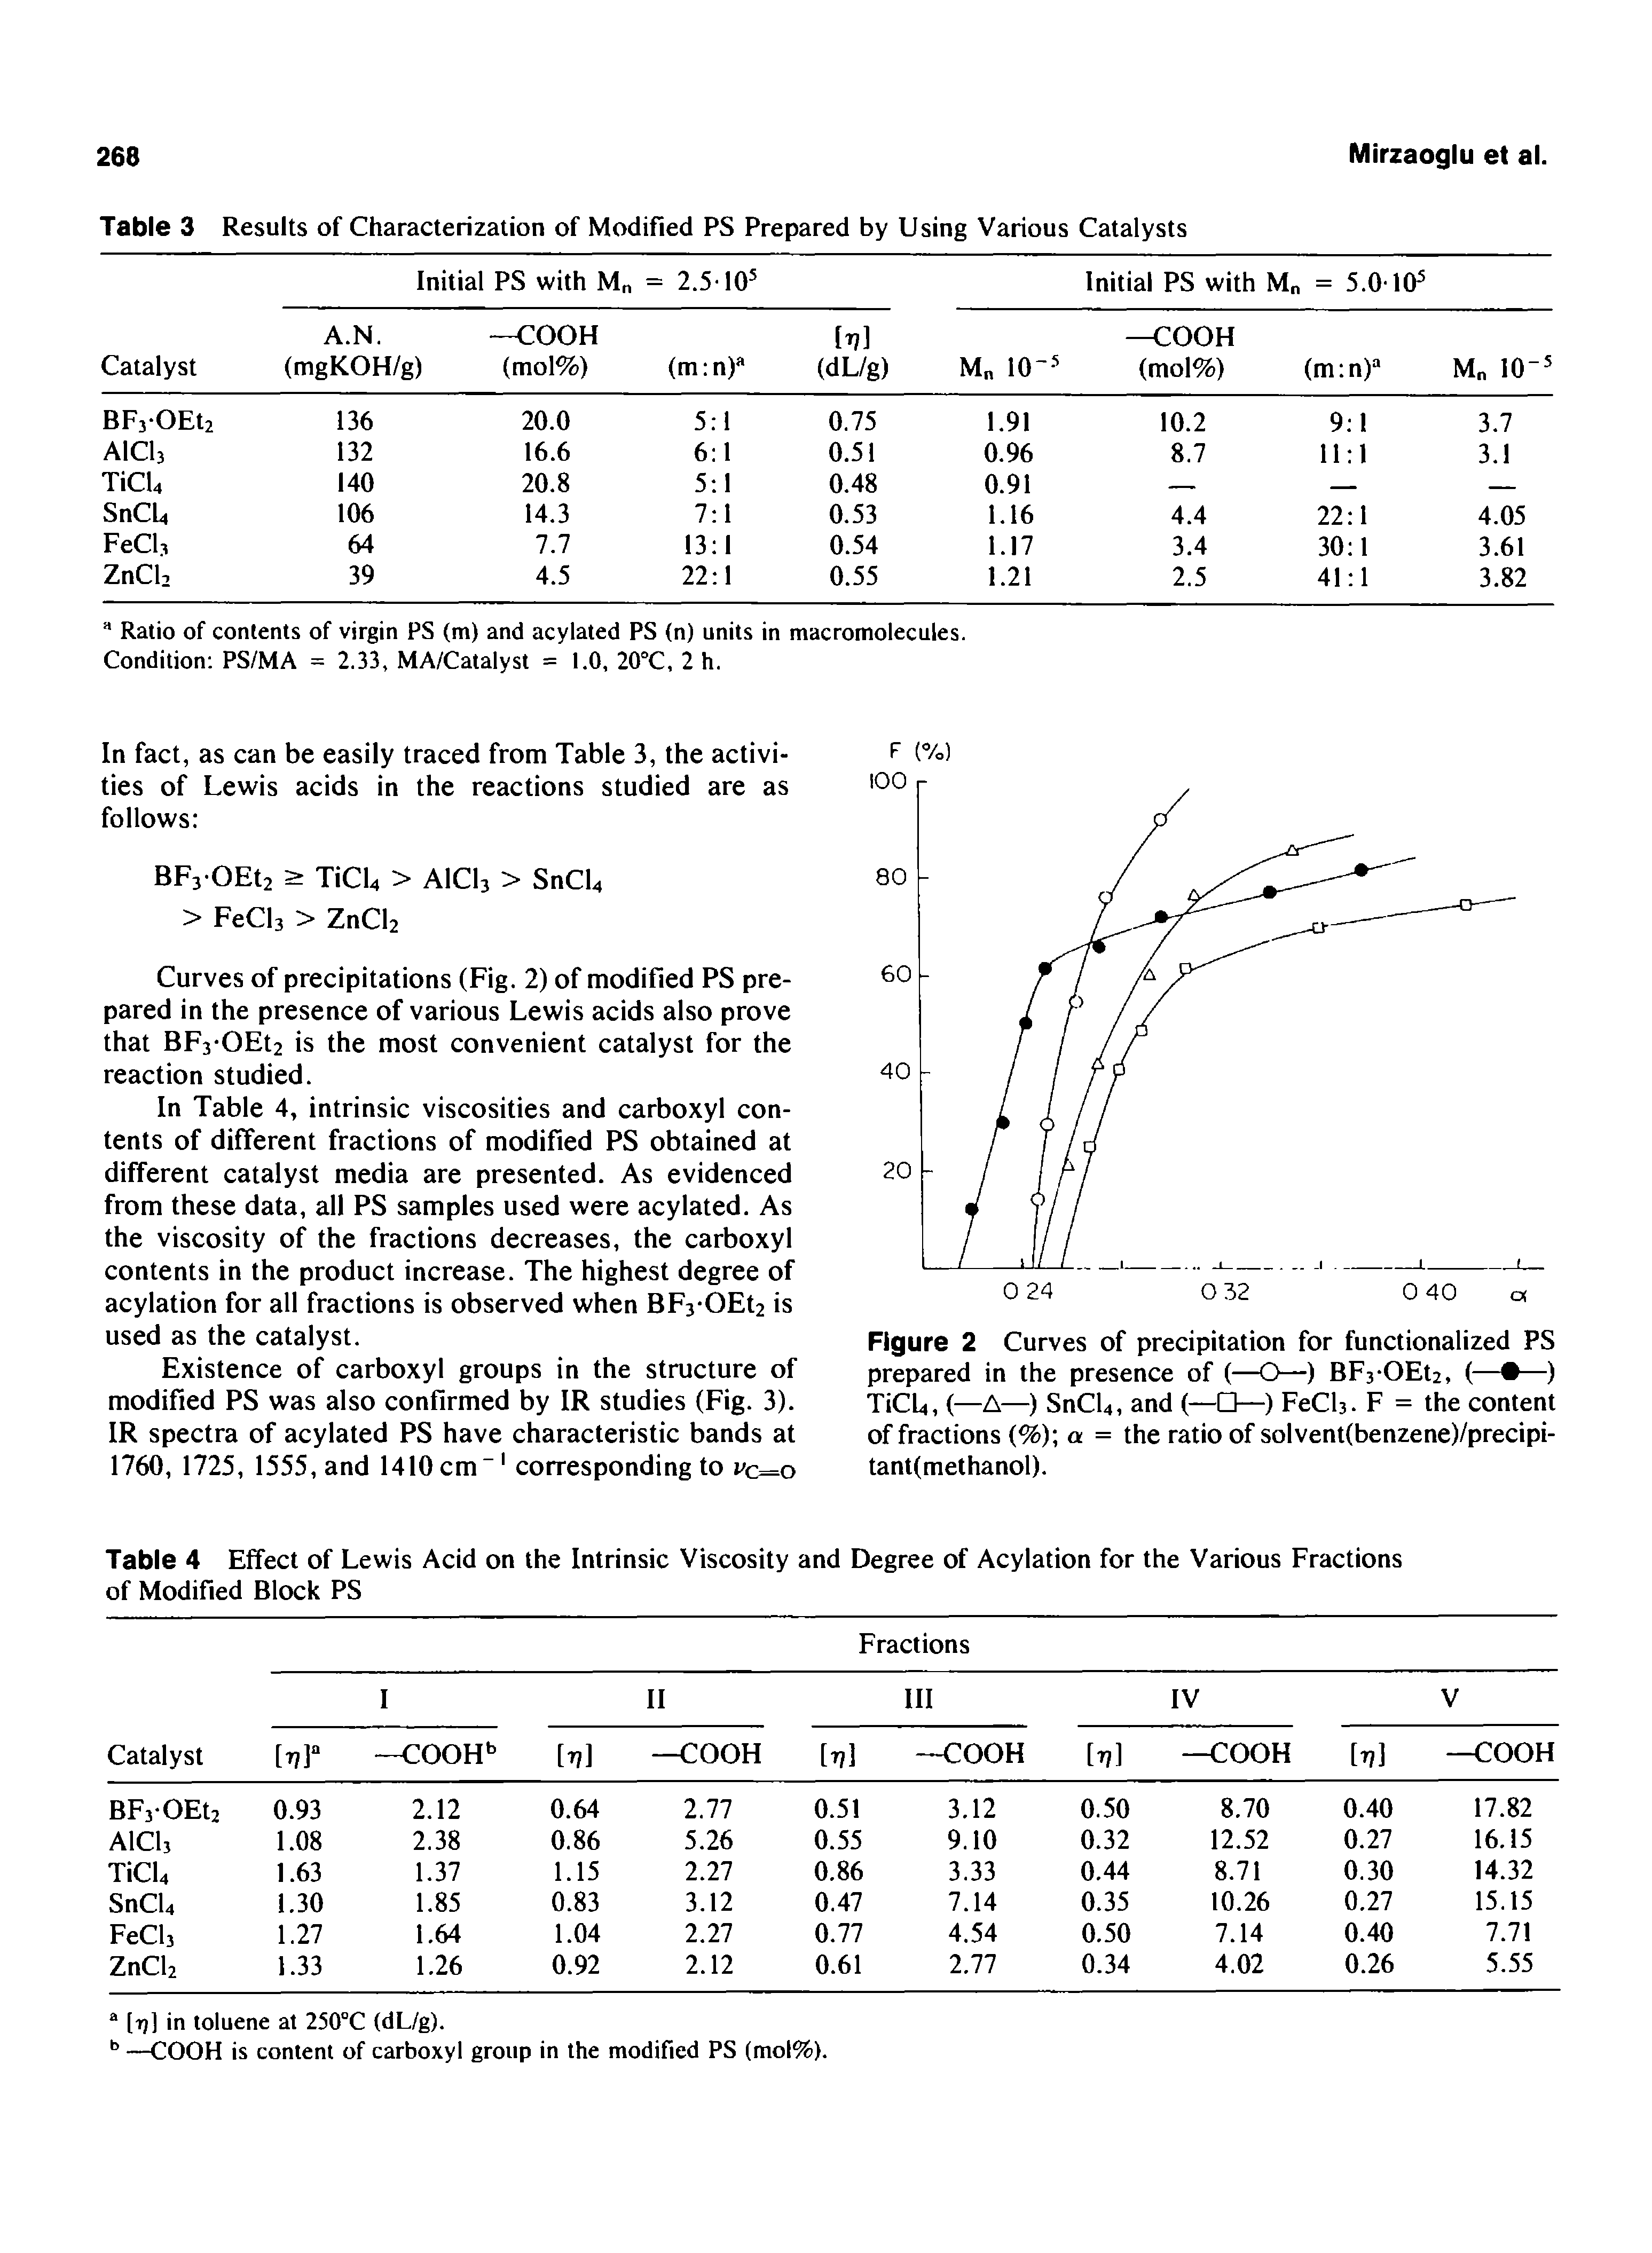 Table 4 Effect of Lewis Acid on the Intrinsic Viscosity and Degree of Acylation for the Various Fractions of Modified Block PS...